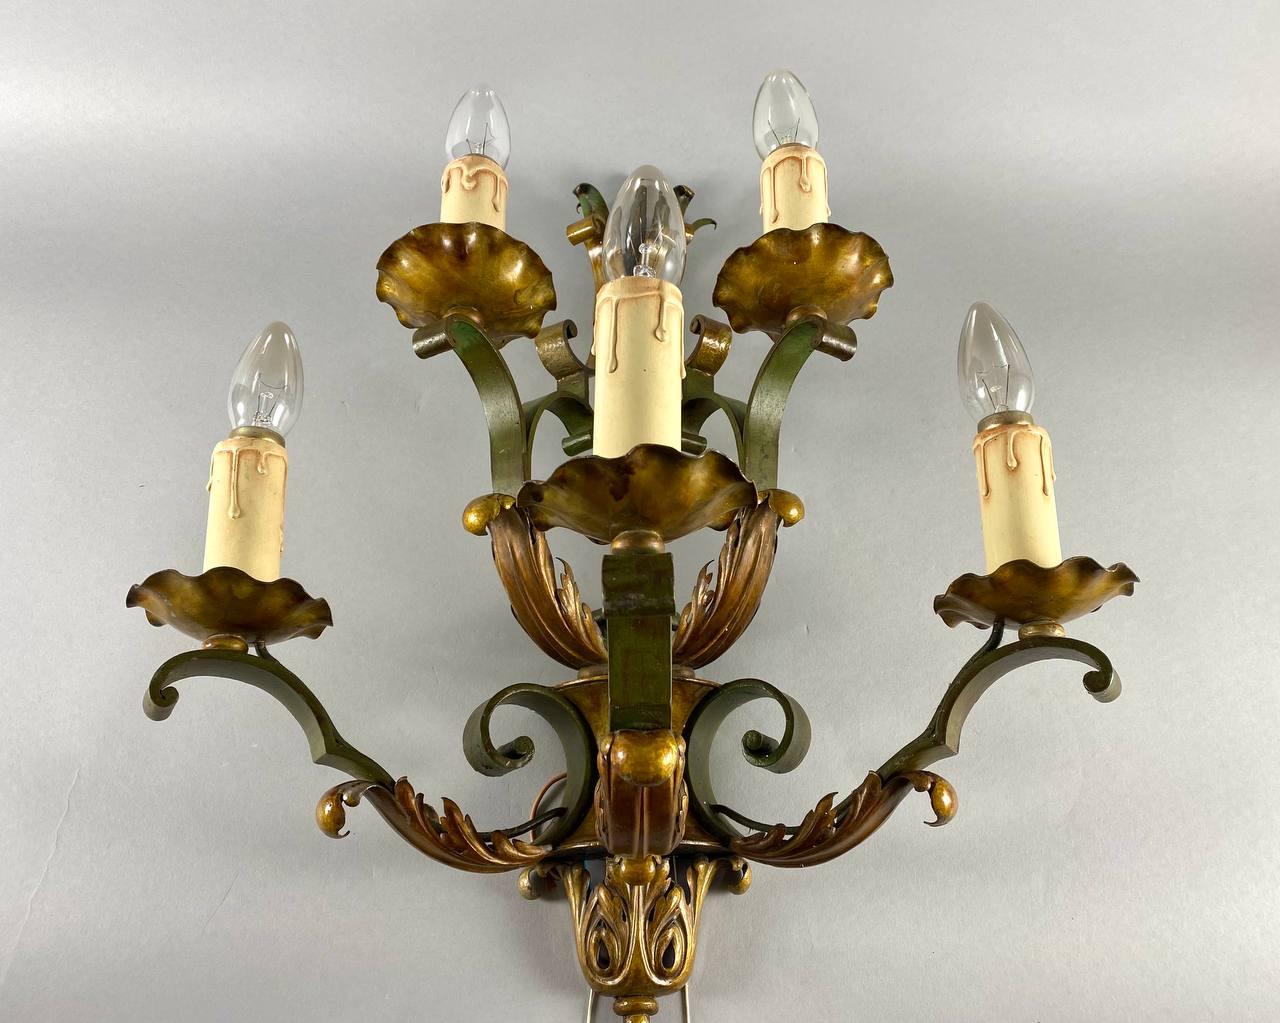 Charming Vintage Wall Sconce For 5 Light Point Metal Tiered Wall Lamp For Sale 3